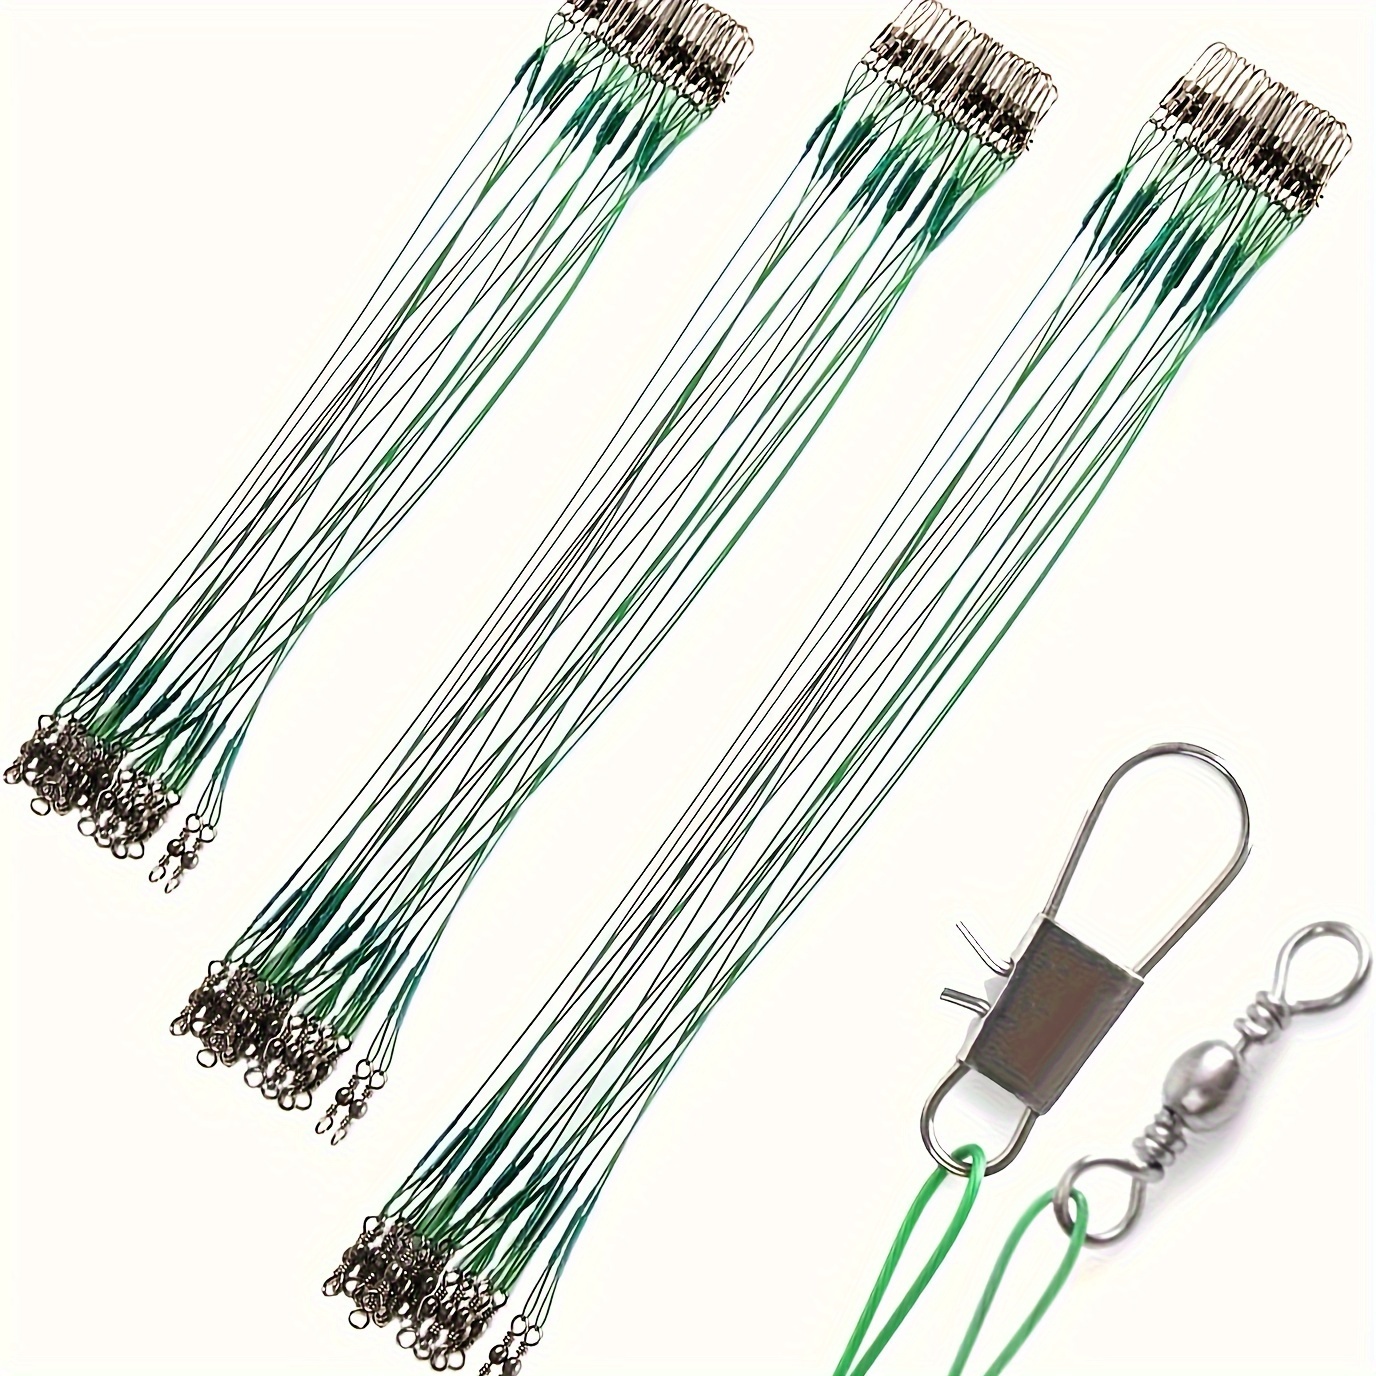 

60pcs Fishing -stainless, 3 Sizes (6"/8"/10"), Swivels & Snaps, Easy Lure & Hook Switch, Ideal For Saltwater & Freshwater Toothy Fish, Perfect Gift.